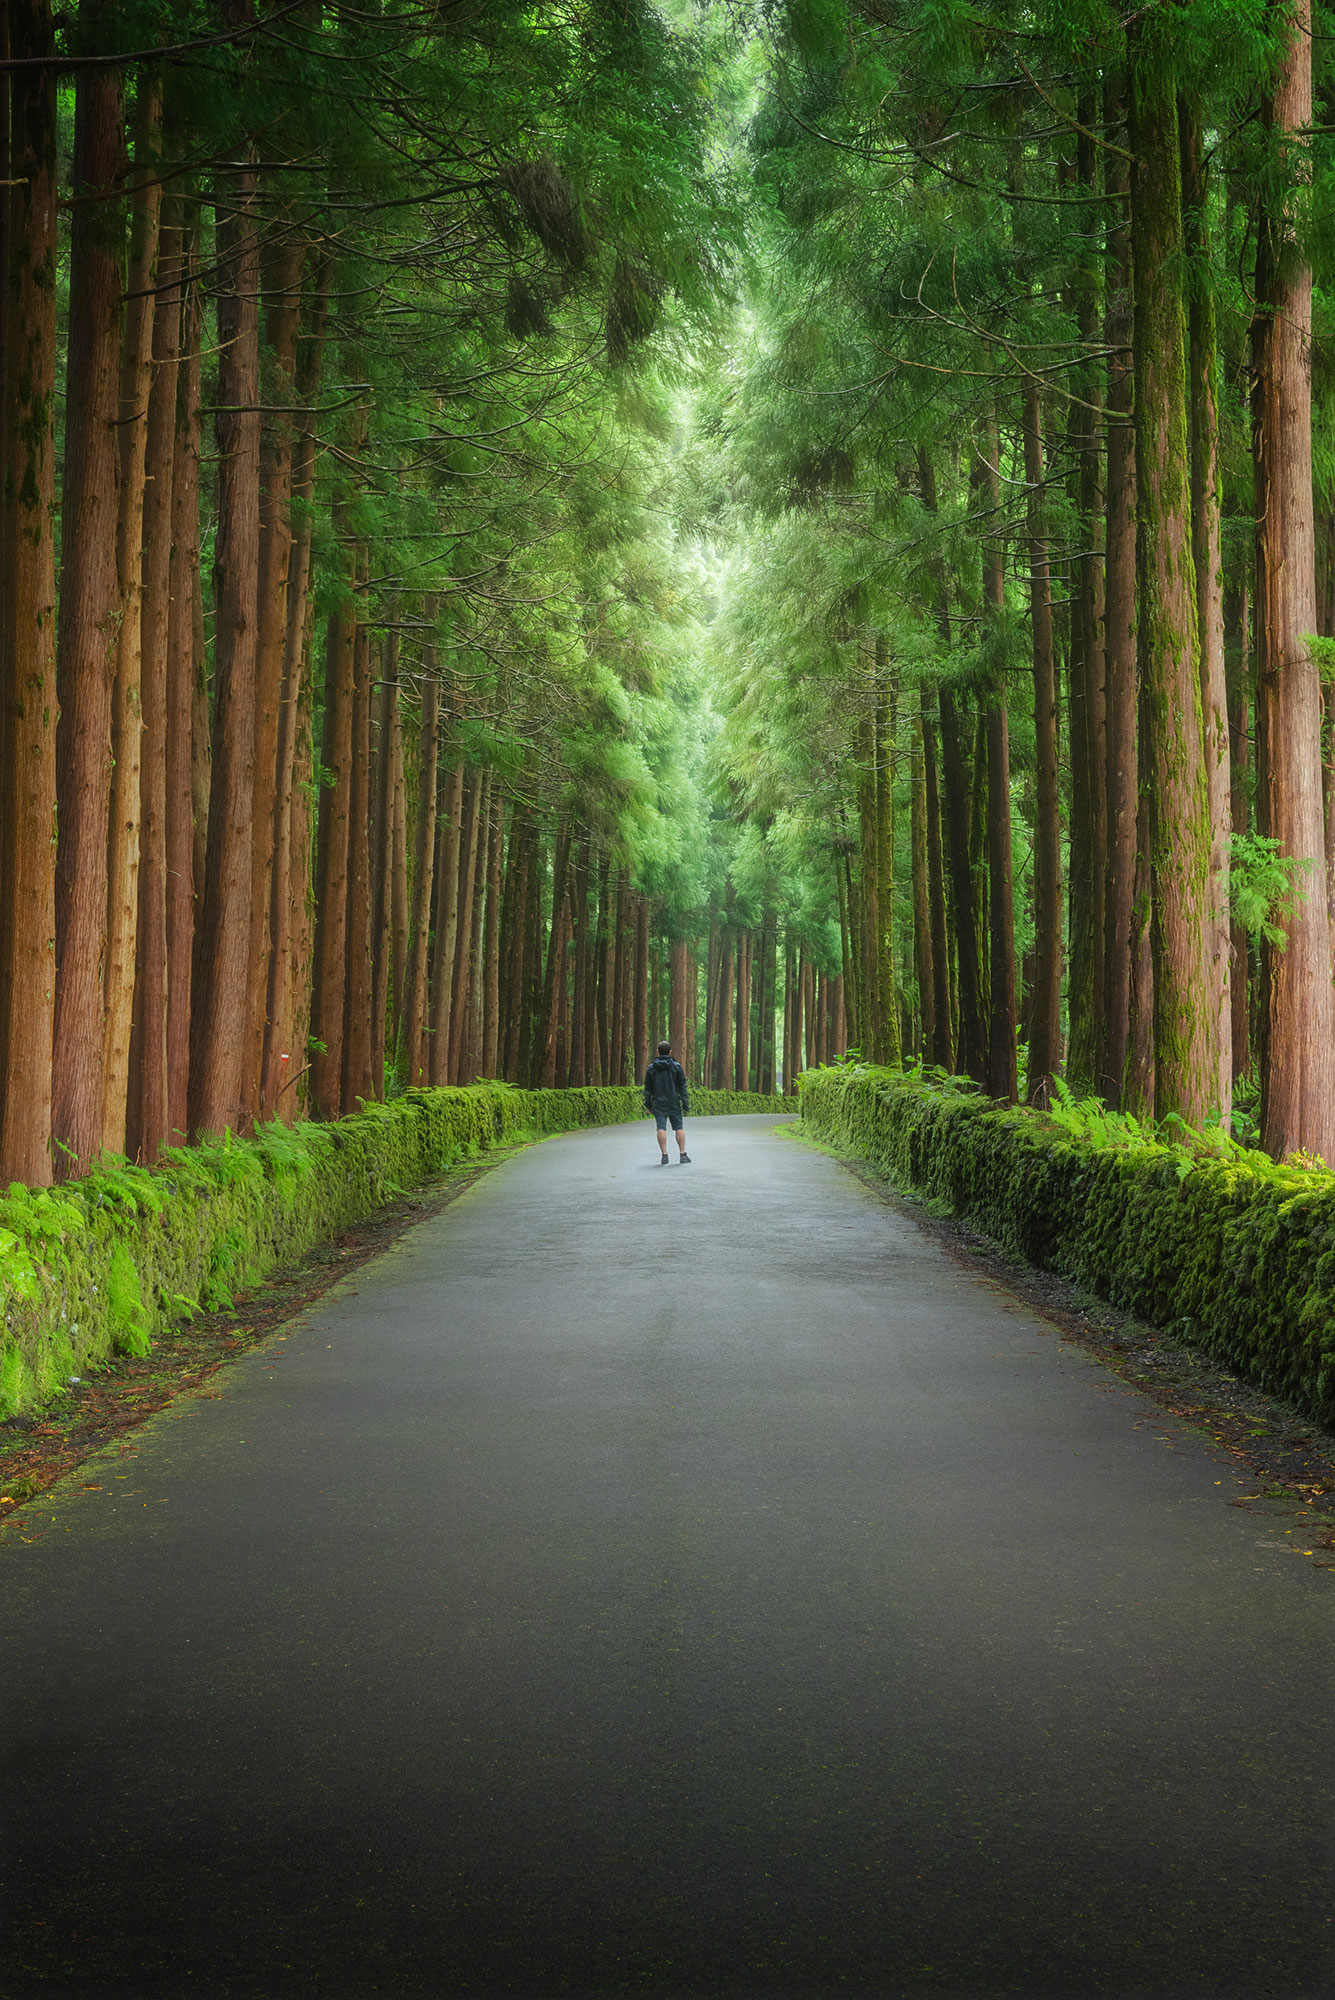 Experience the enchanting allure of Terceira Island as a lone figure wanders through a mystical pine alley. This captivating landscape photograph captures the serene beauty and mystique of Terceira's natural wonders. Prepare to be transported to a world of wonder and tranquility as you explore the magical atmosphere of this picturesque island destination.